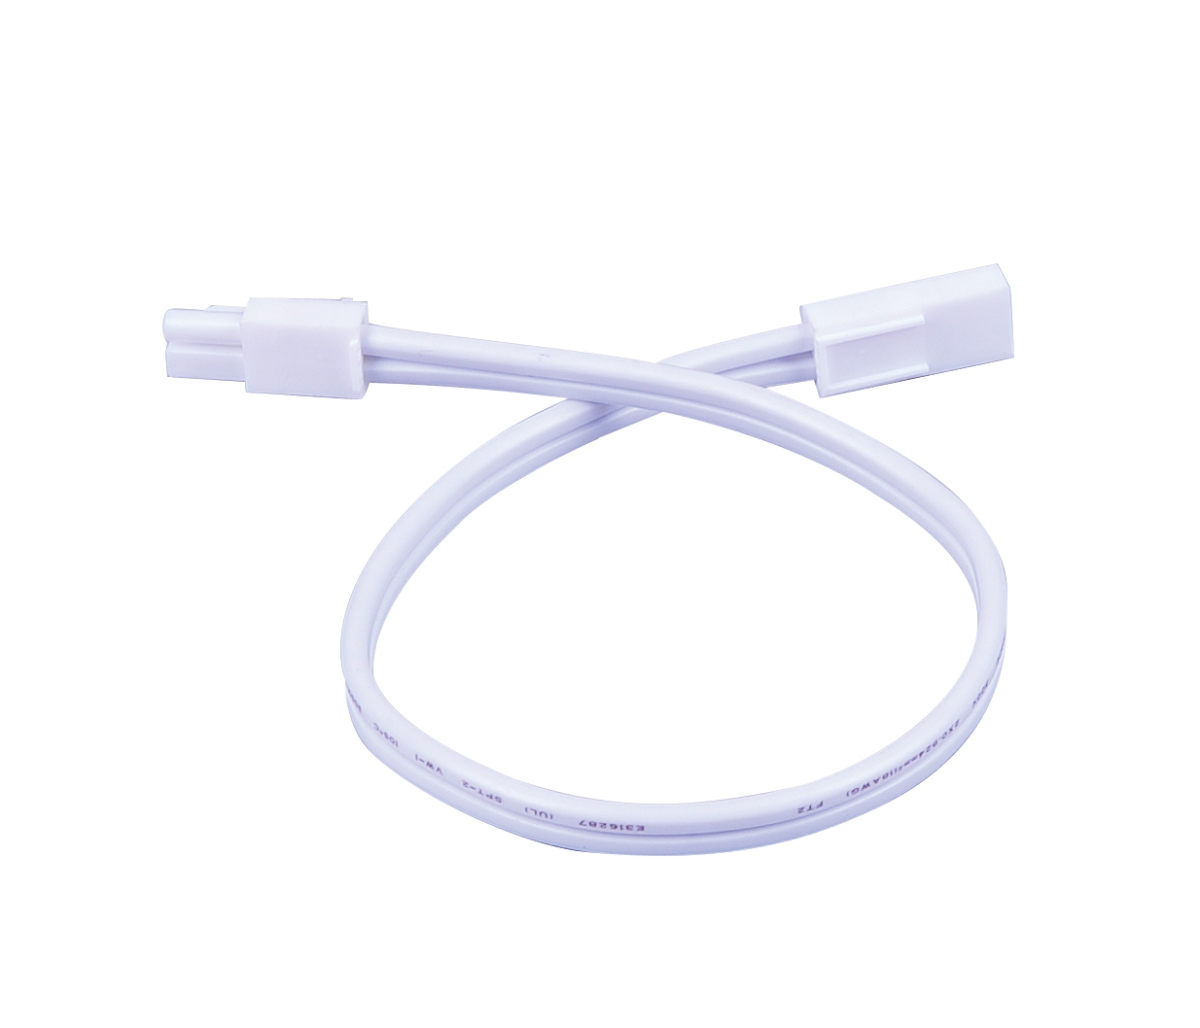 53886wt Countermax Mx-ld-ac Led 12 In. Connecting Cord - White